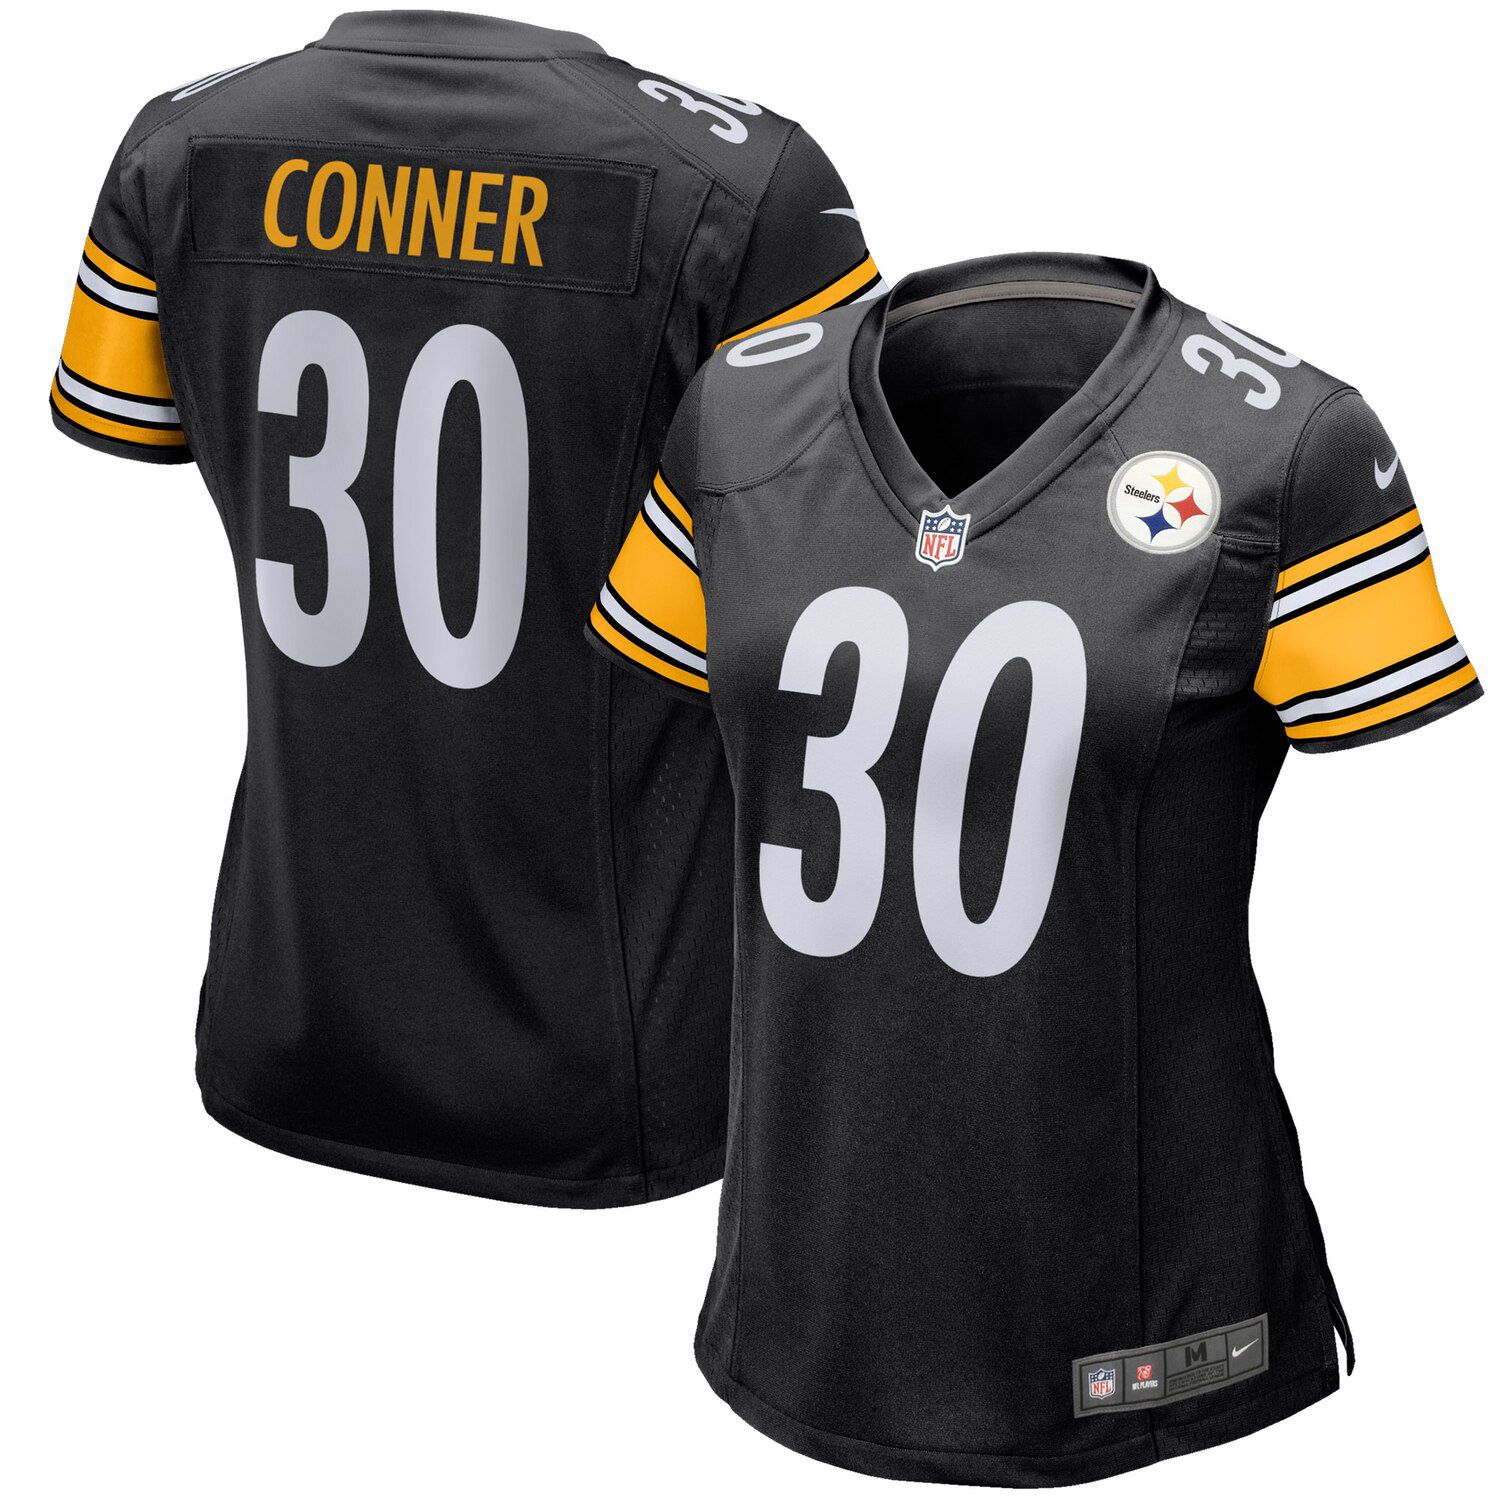 conner steelers jersey